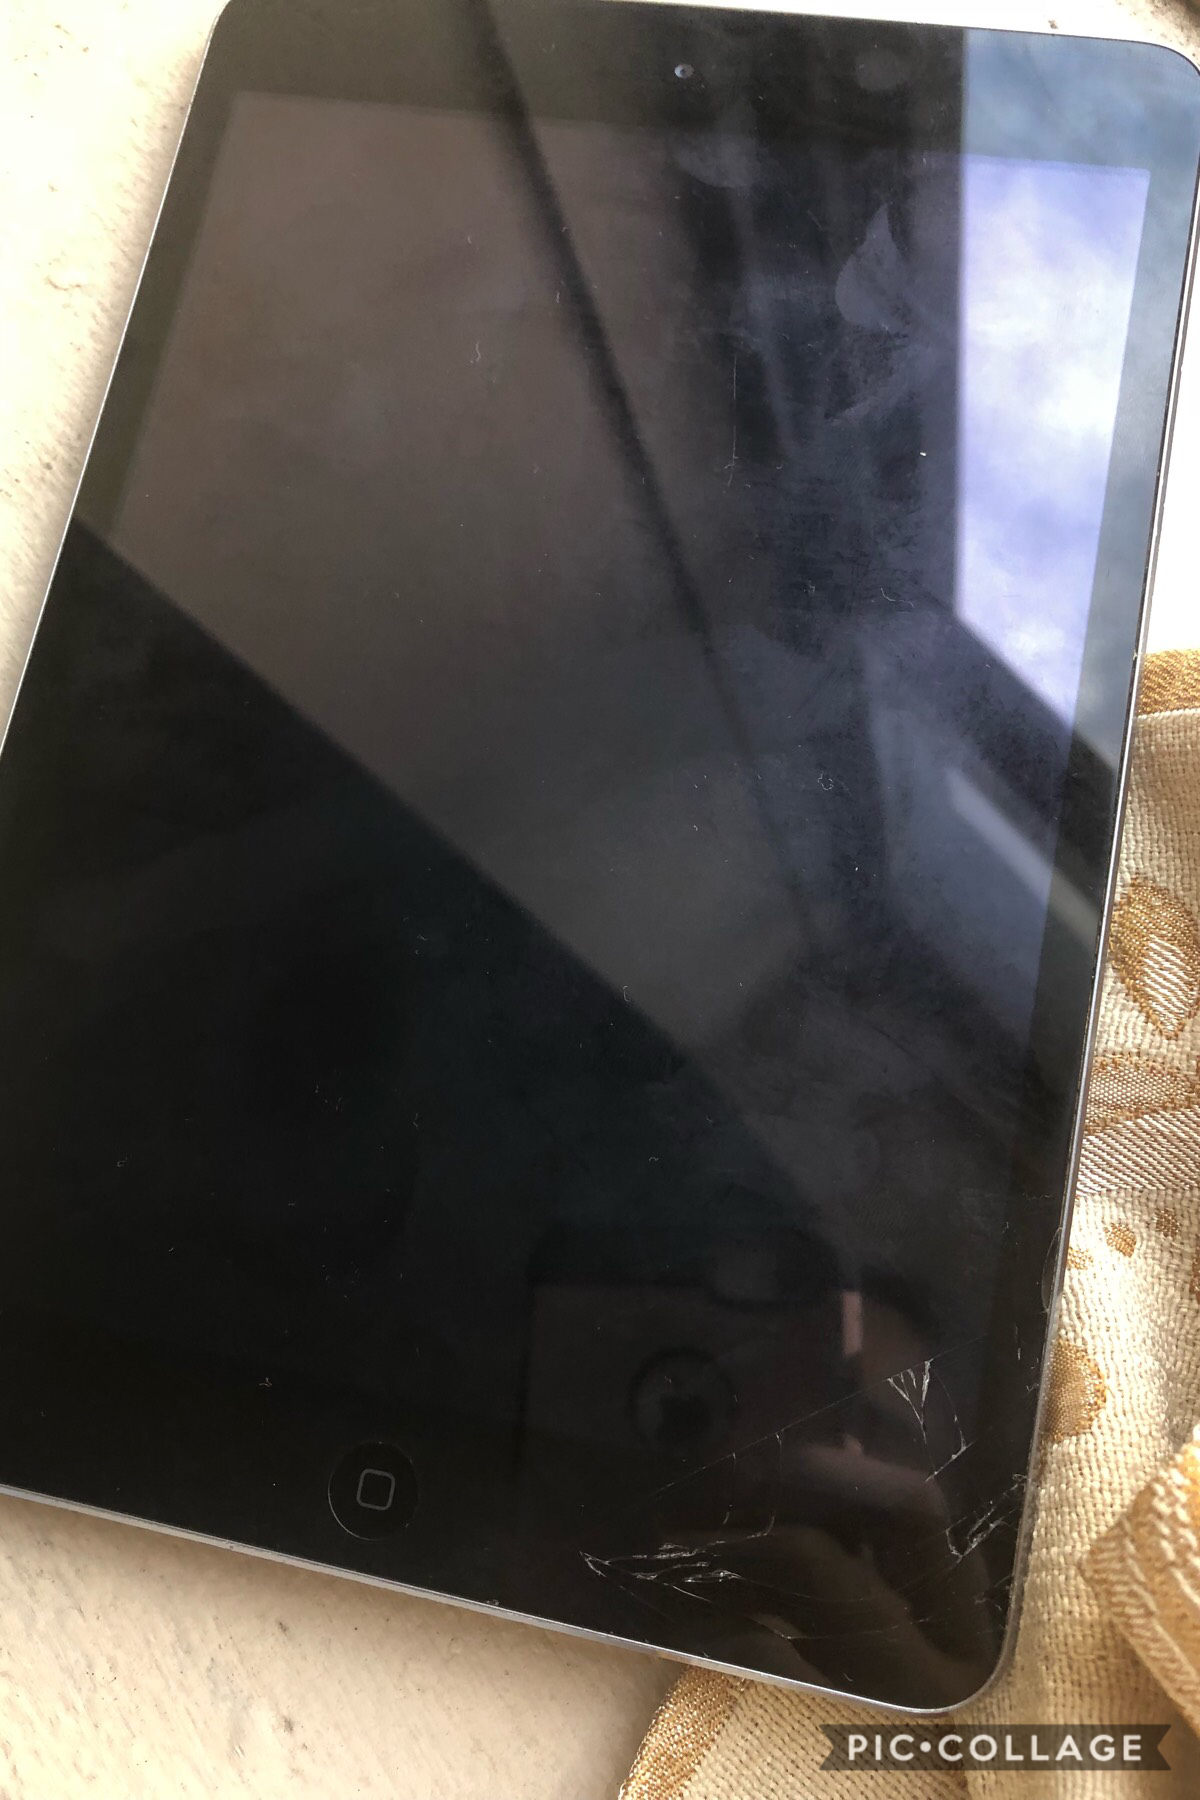 🍒So, heres a picture of my iPad right now🍒 When I came home from shopping, it was cracked🍒Im going hiking & my iPad will be fixed next week or so🍒
#PCONLY
#CRACKED
#CHERRYS
#HIKING
#ME
#INTHE
#PIC